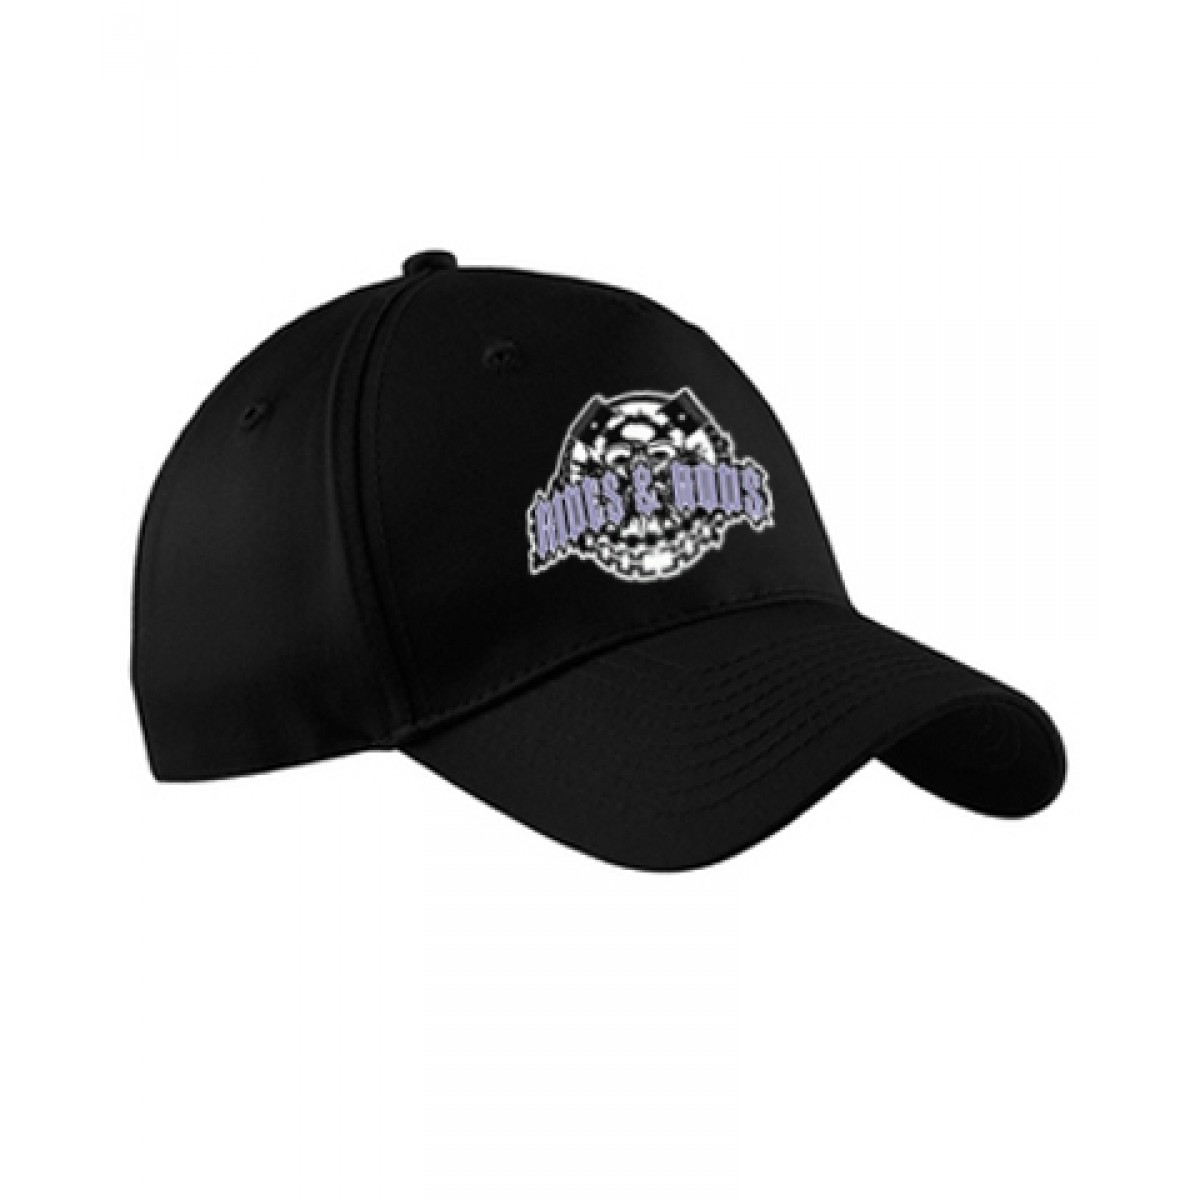 Rides and Rods embroidered hat (black)